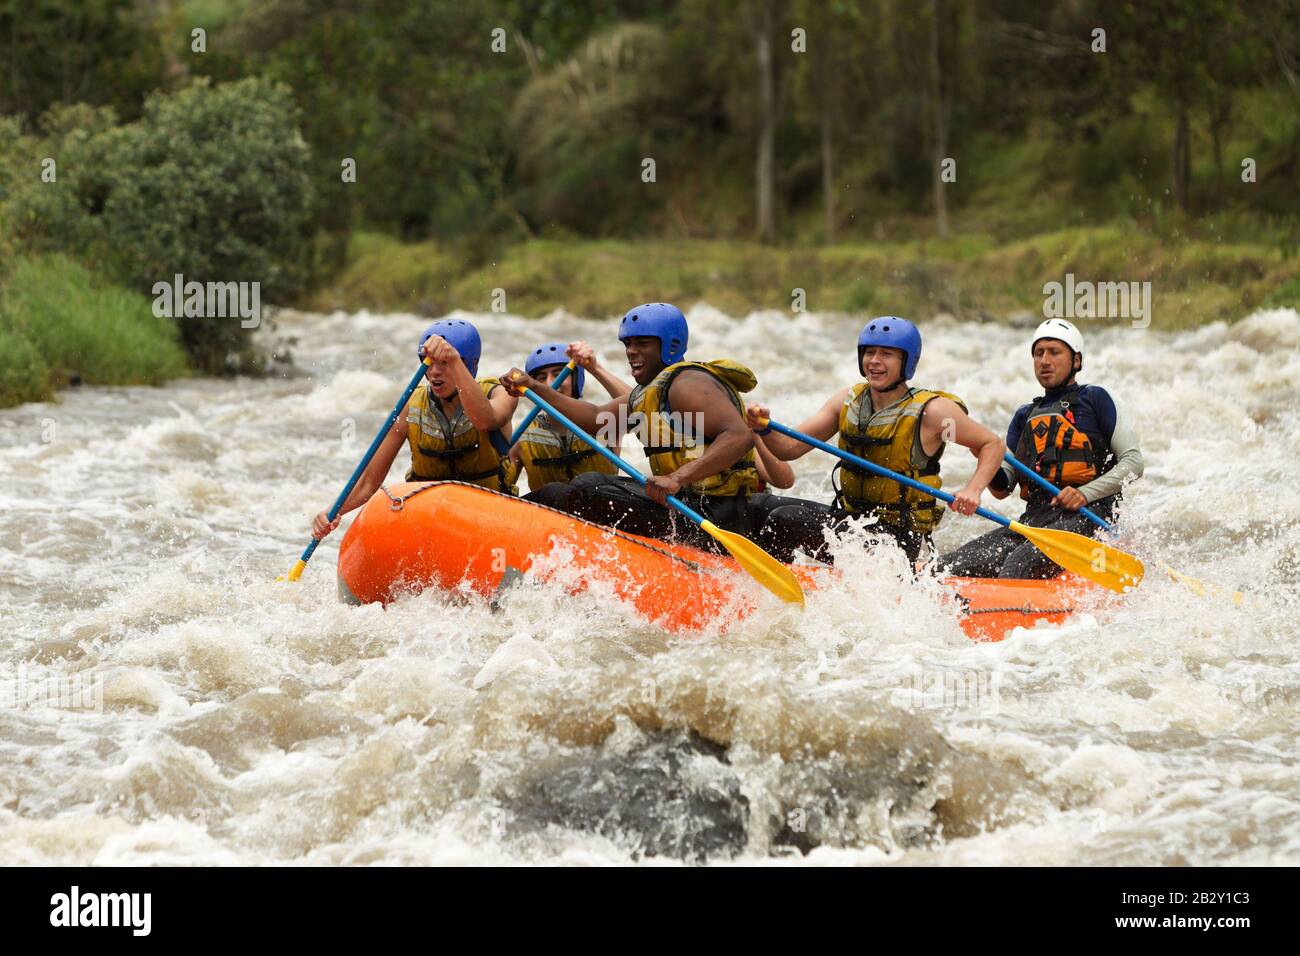 Union Of Mixed Pioneer Male And Lady With Guided By Professional Pilot On Whitewater Waterway Rafting In Ecuador Stock Photo